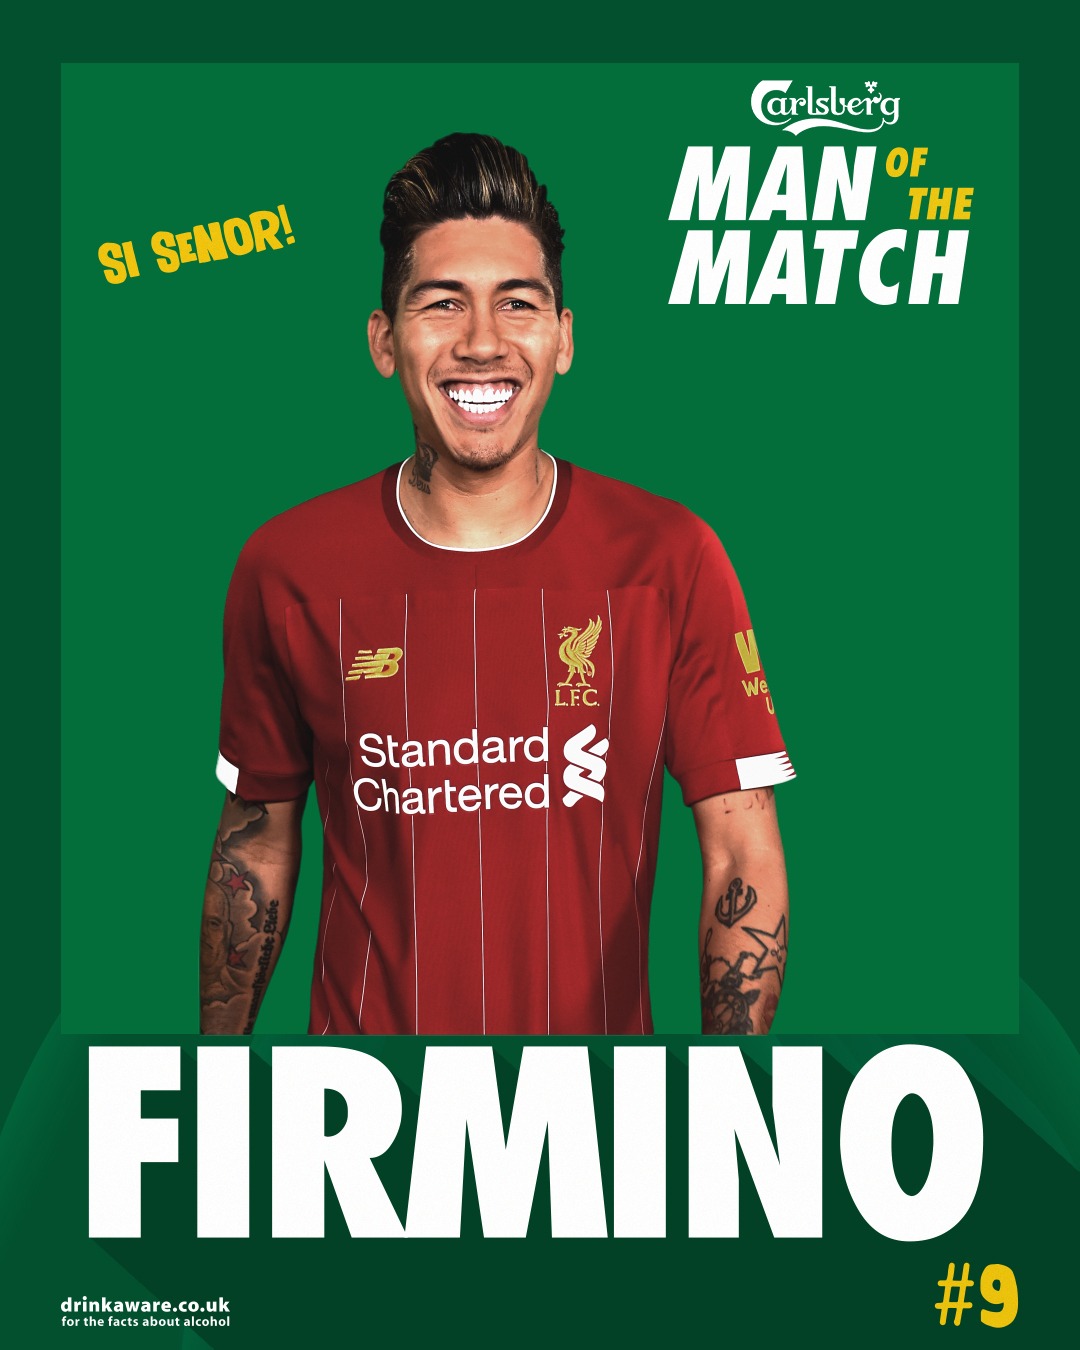 Bliv forvirret Mainstream Traditionel Liverpool FC on Twitter: "Brilliant goal. Brilliant performance. 🔥 Bobby  Firmino is your @carlsberg Man of the Match 👏 https://t.co/PnJq6c0uGM" /  Twitter